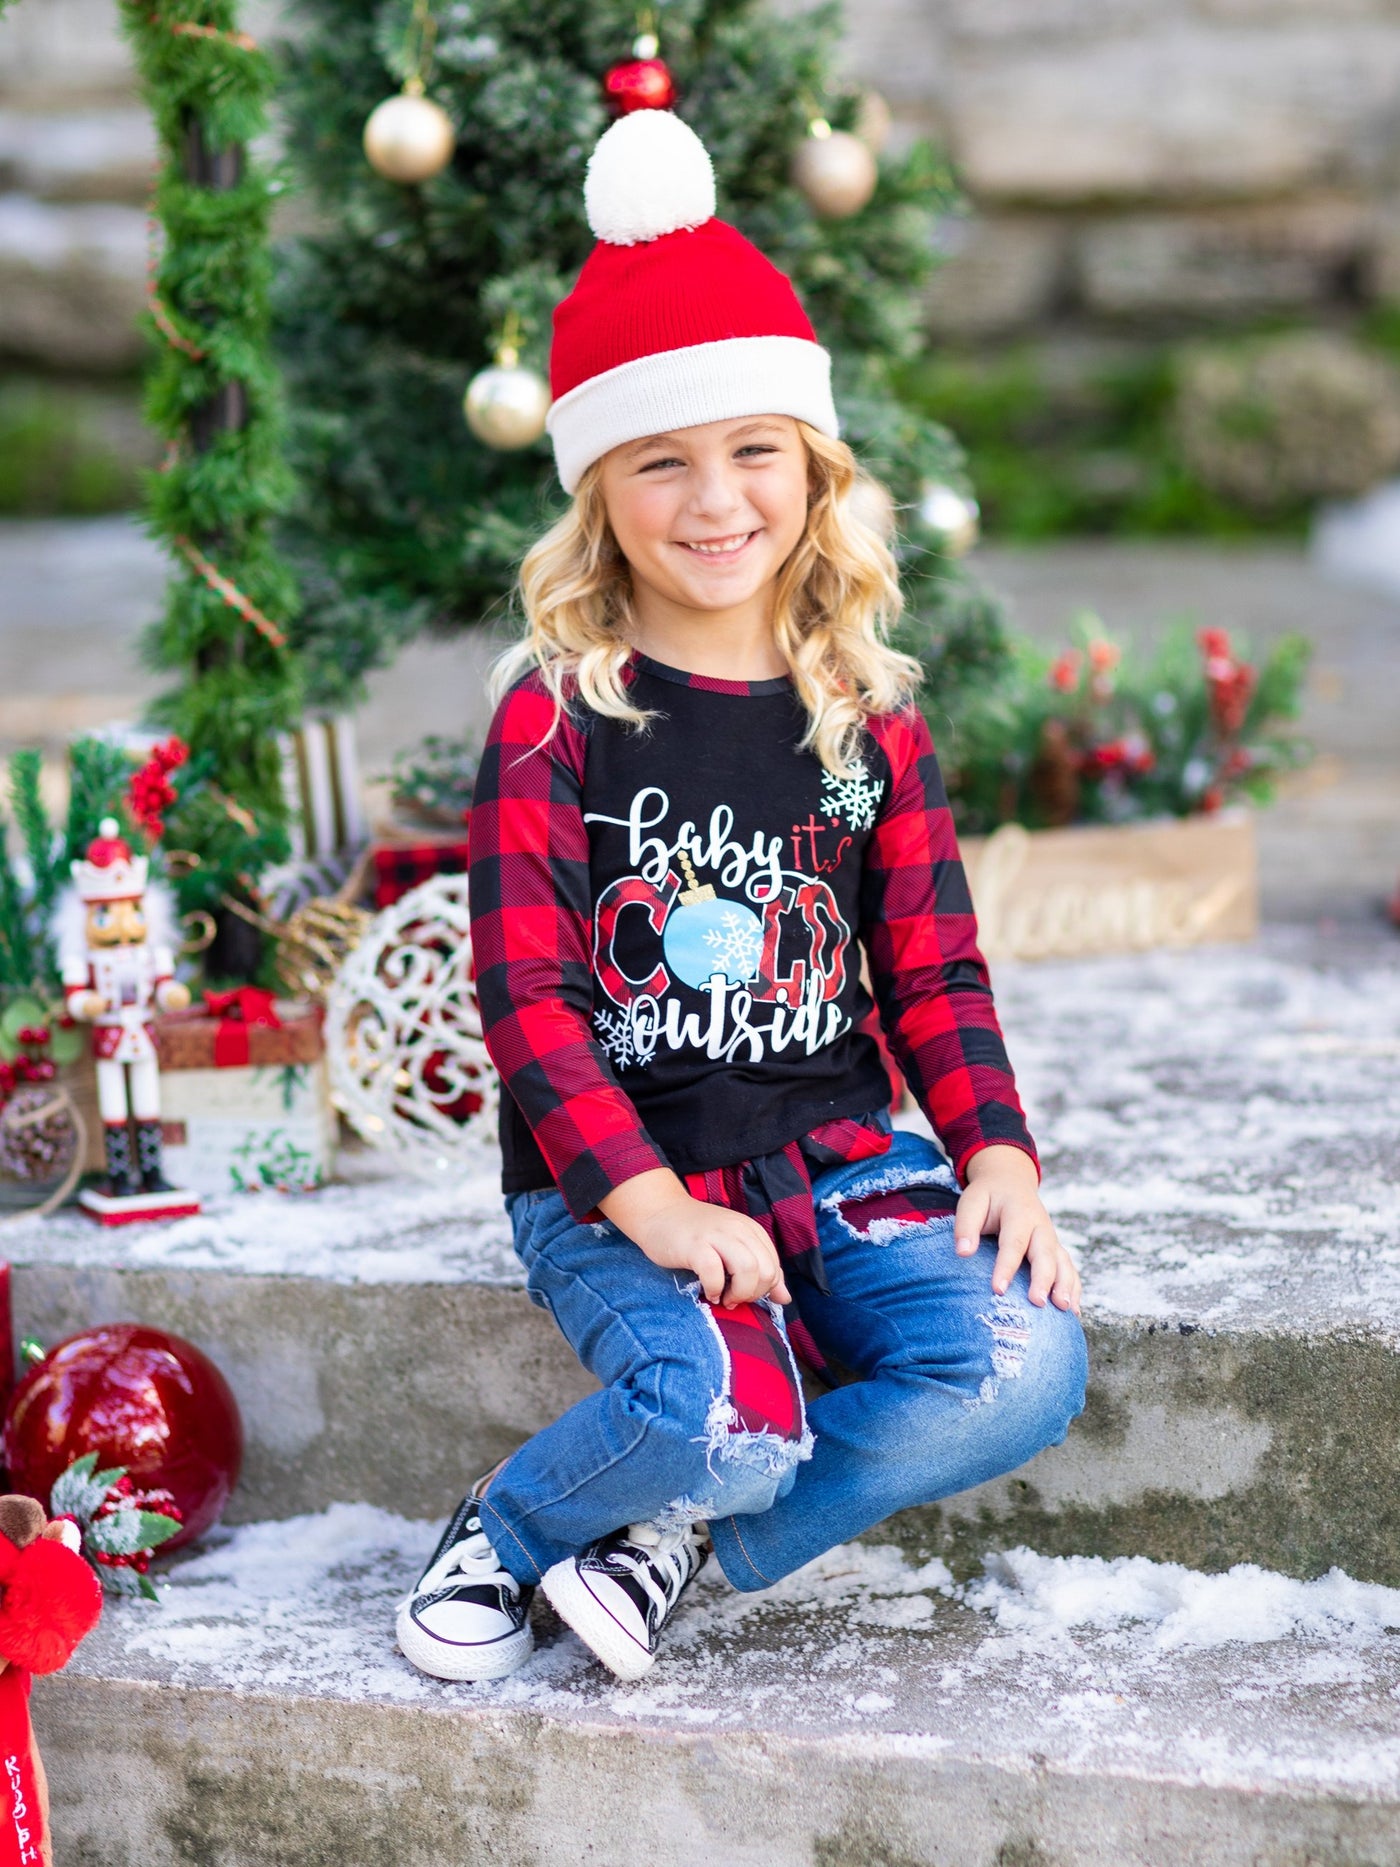 Cute Winter Sets | Baby It's Cold Outside Top and Patched Jeans Set 